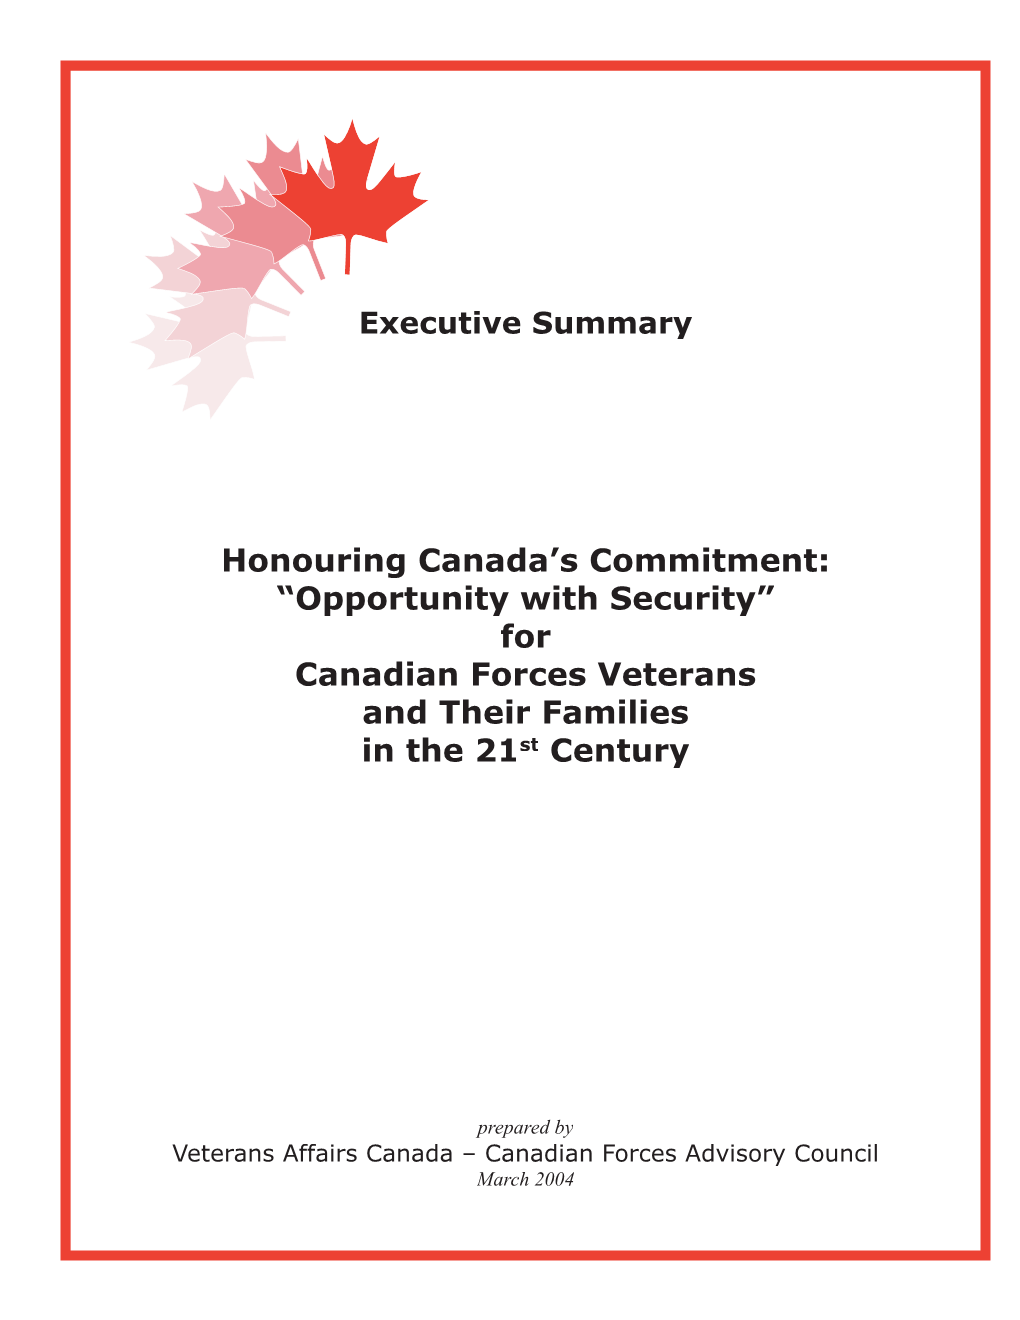 For Canadian Forces Veterans and Their Families in the 21St Century